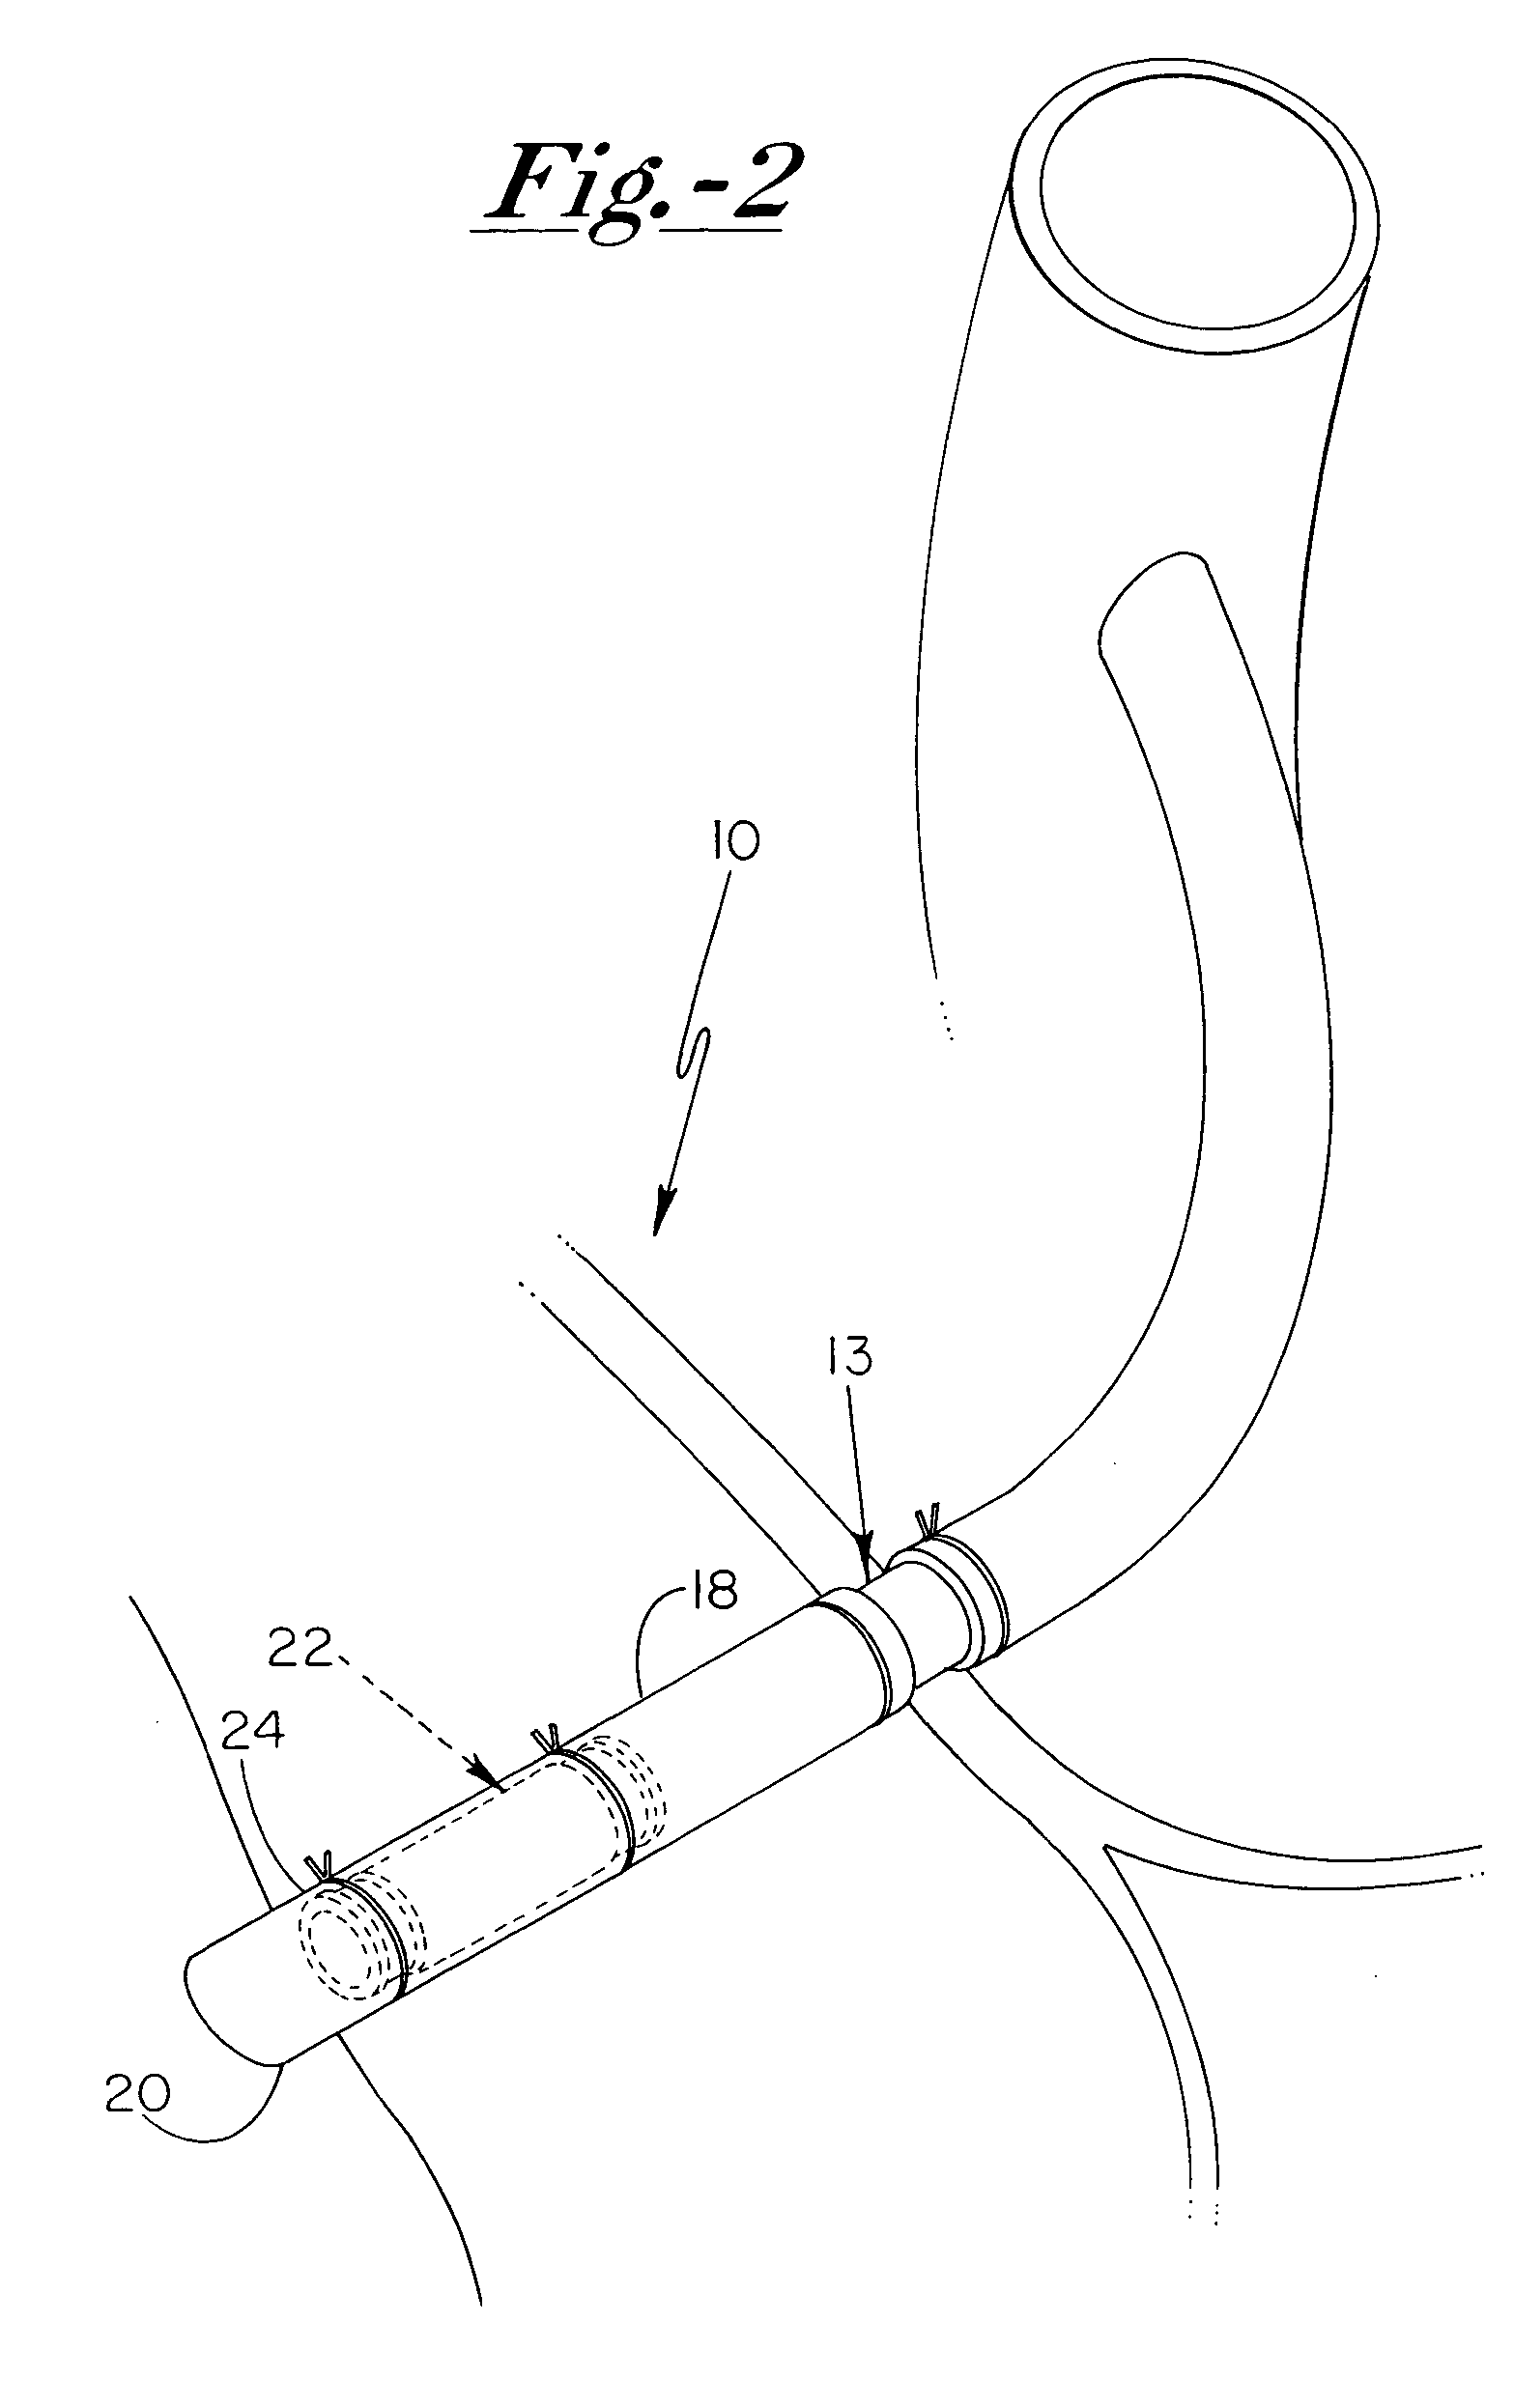 Grafted network incorporating a multiple channel fluid flow connector